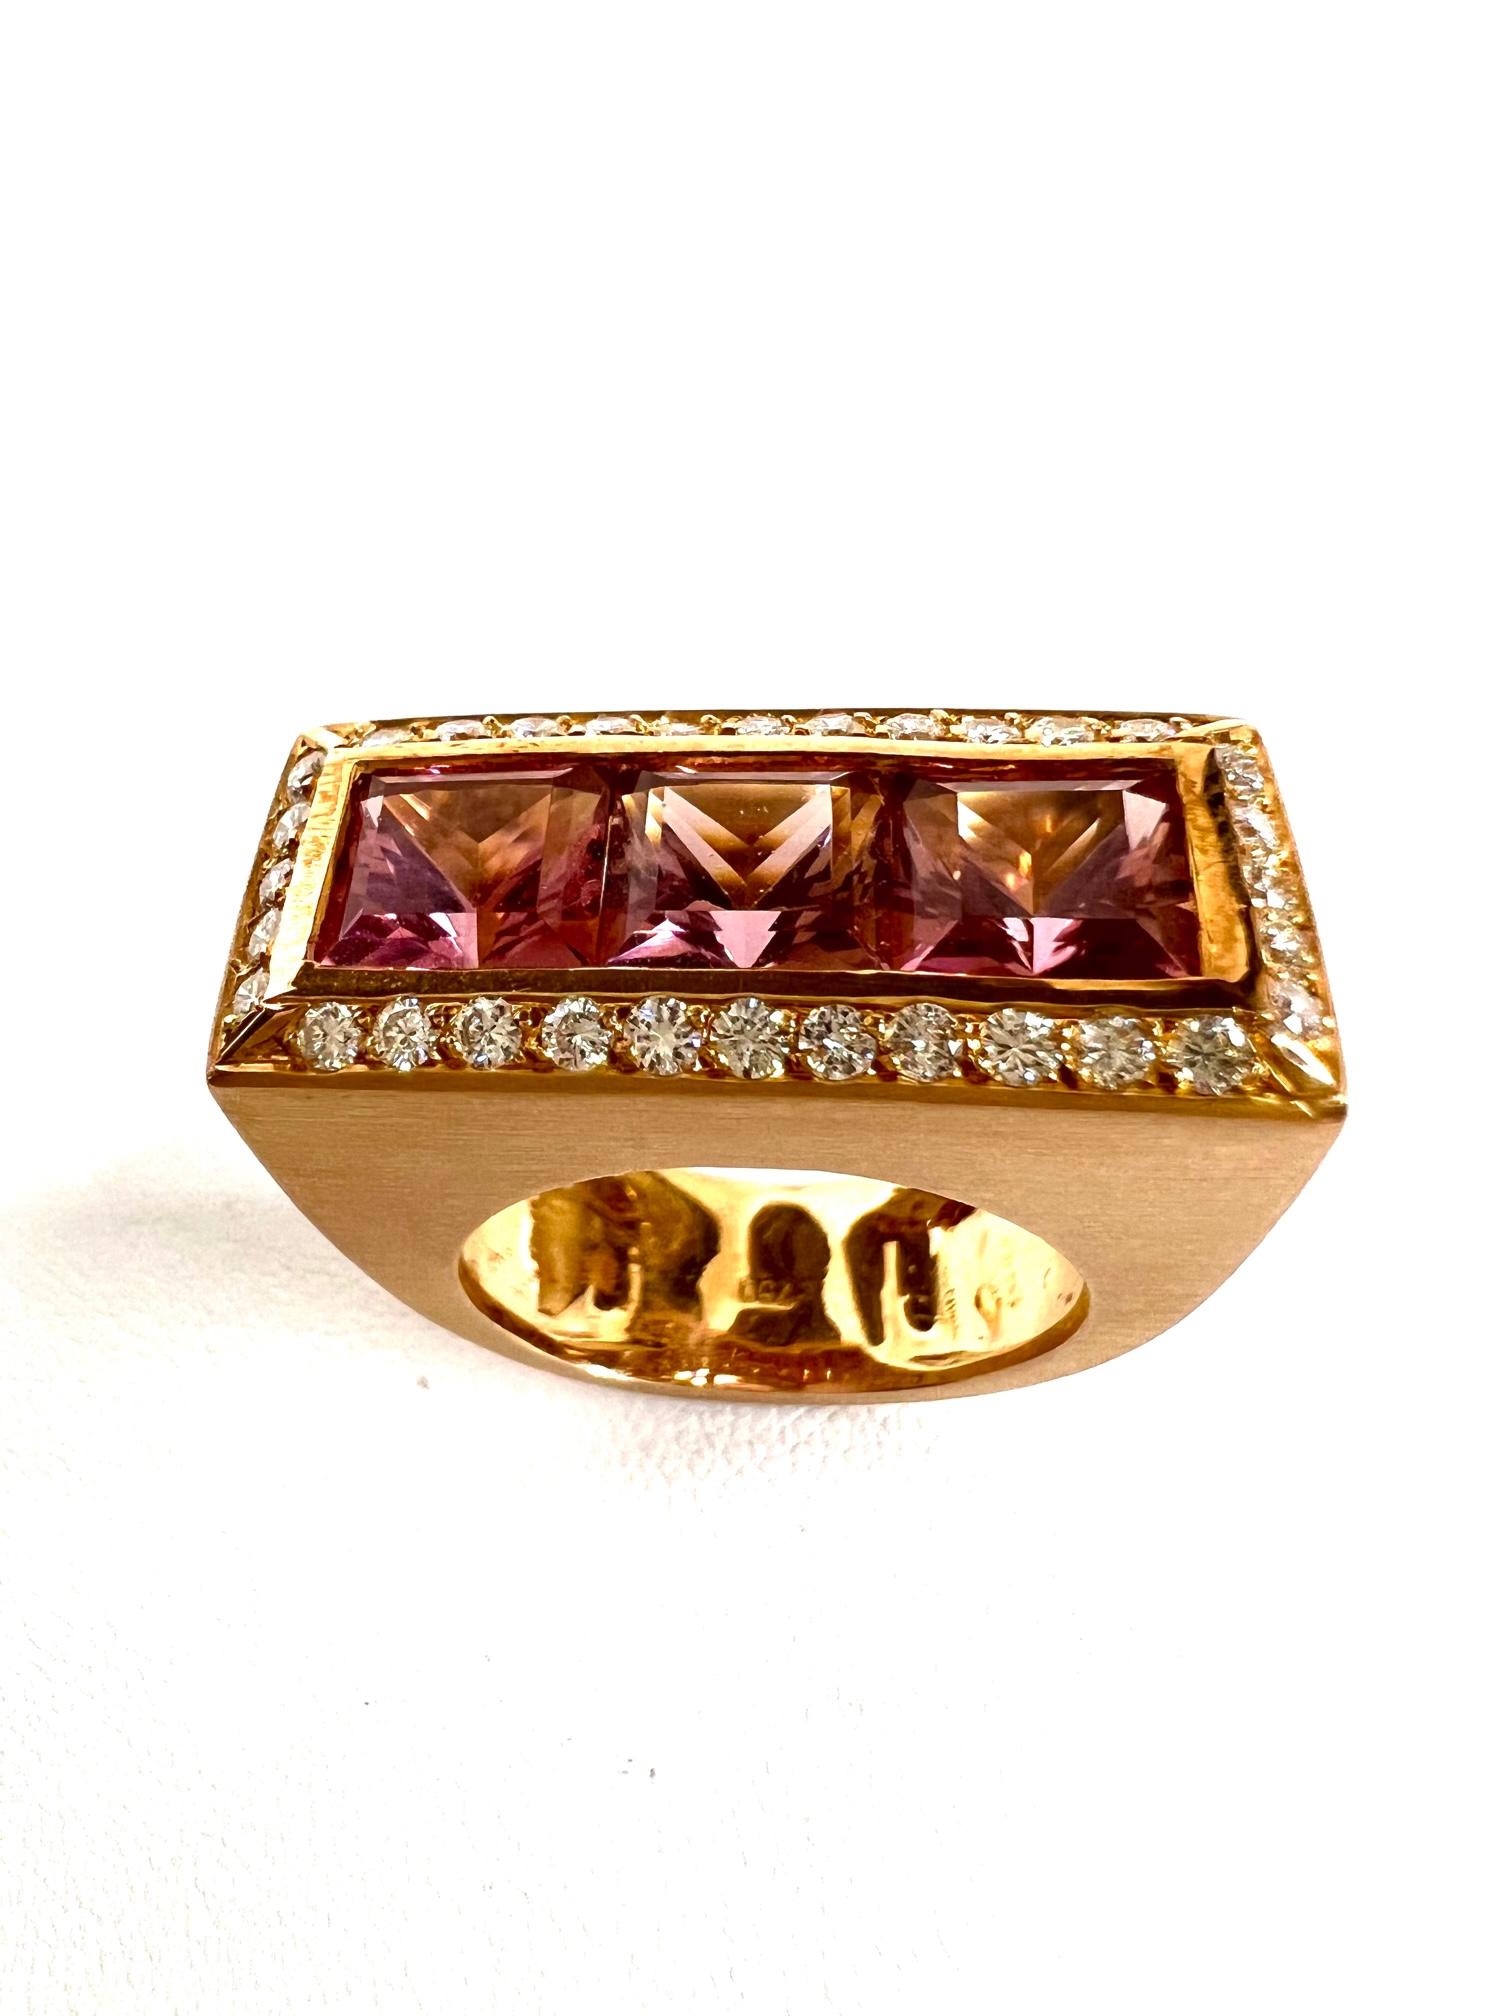 Thomas Leyser is renowned for his contemporary jewellery designs utilizing fine gemstones.

Ring in 18K red gold 13,9gr. with 3x Pink Tourmaline (princess-cut, 7x7mm, 7,5cts.) + 32x Diamonds (brillant-cut, 0,32 cts., G/VS).

Ringsize is 54,5 (7) and